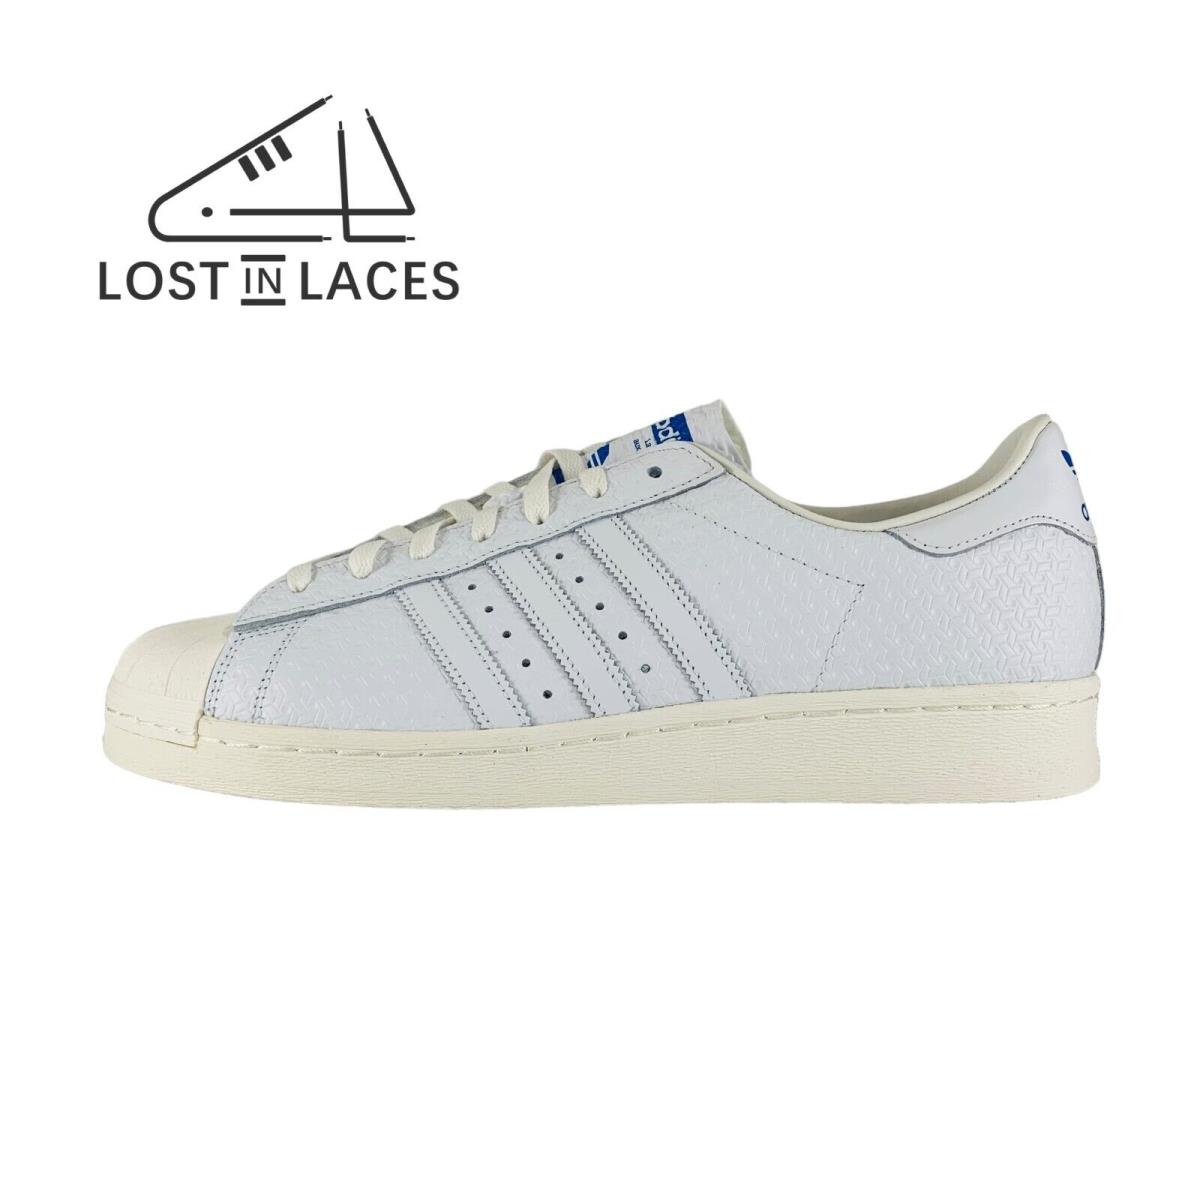 Adidas Superstar 82 White Blue Sneakers Men`s Shoes HP2183 - White